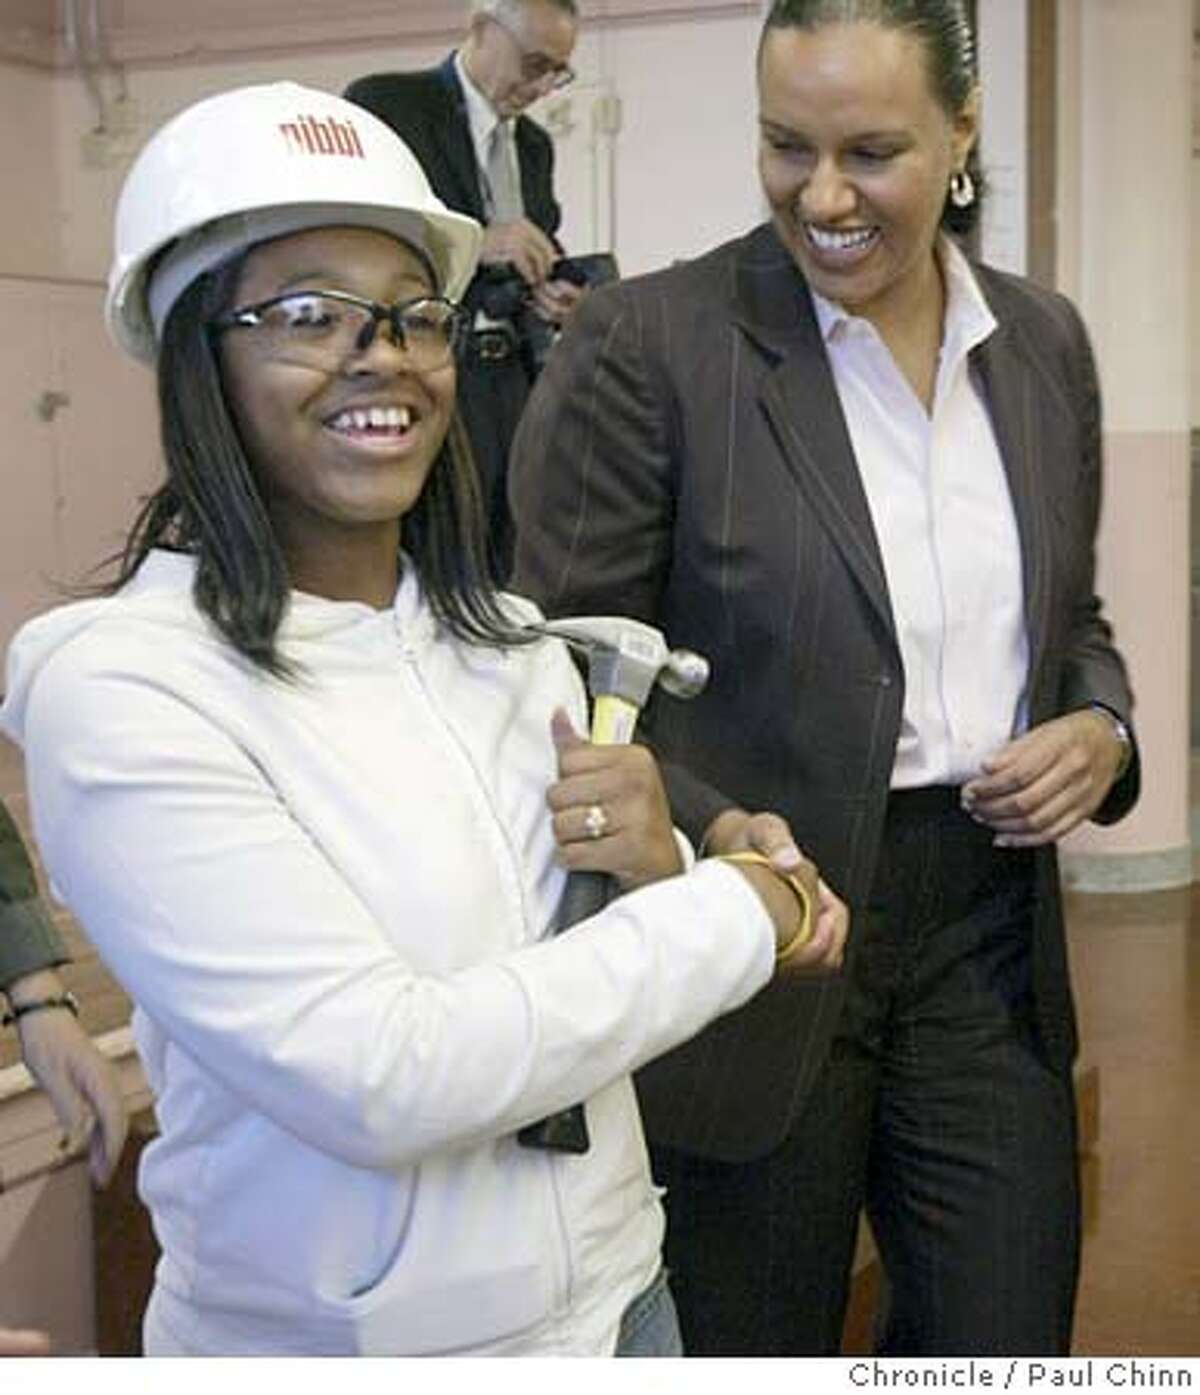 School Board Commissioner Heather Hiles (right) congratulates Sade Richardson for winning an informal nailing contest. The Building and Trades Union gives continuation high schools in San Francisco new shop classes and vocational skills training in a time when both are being sacrificed to academic classes and standardized test preparation. Ida B. Wells High School on 9/23/04 in San Francisco, CA. PAUL CHINN/The Chronicle